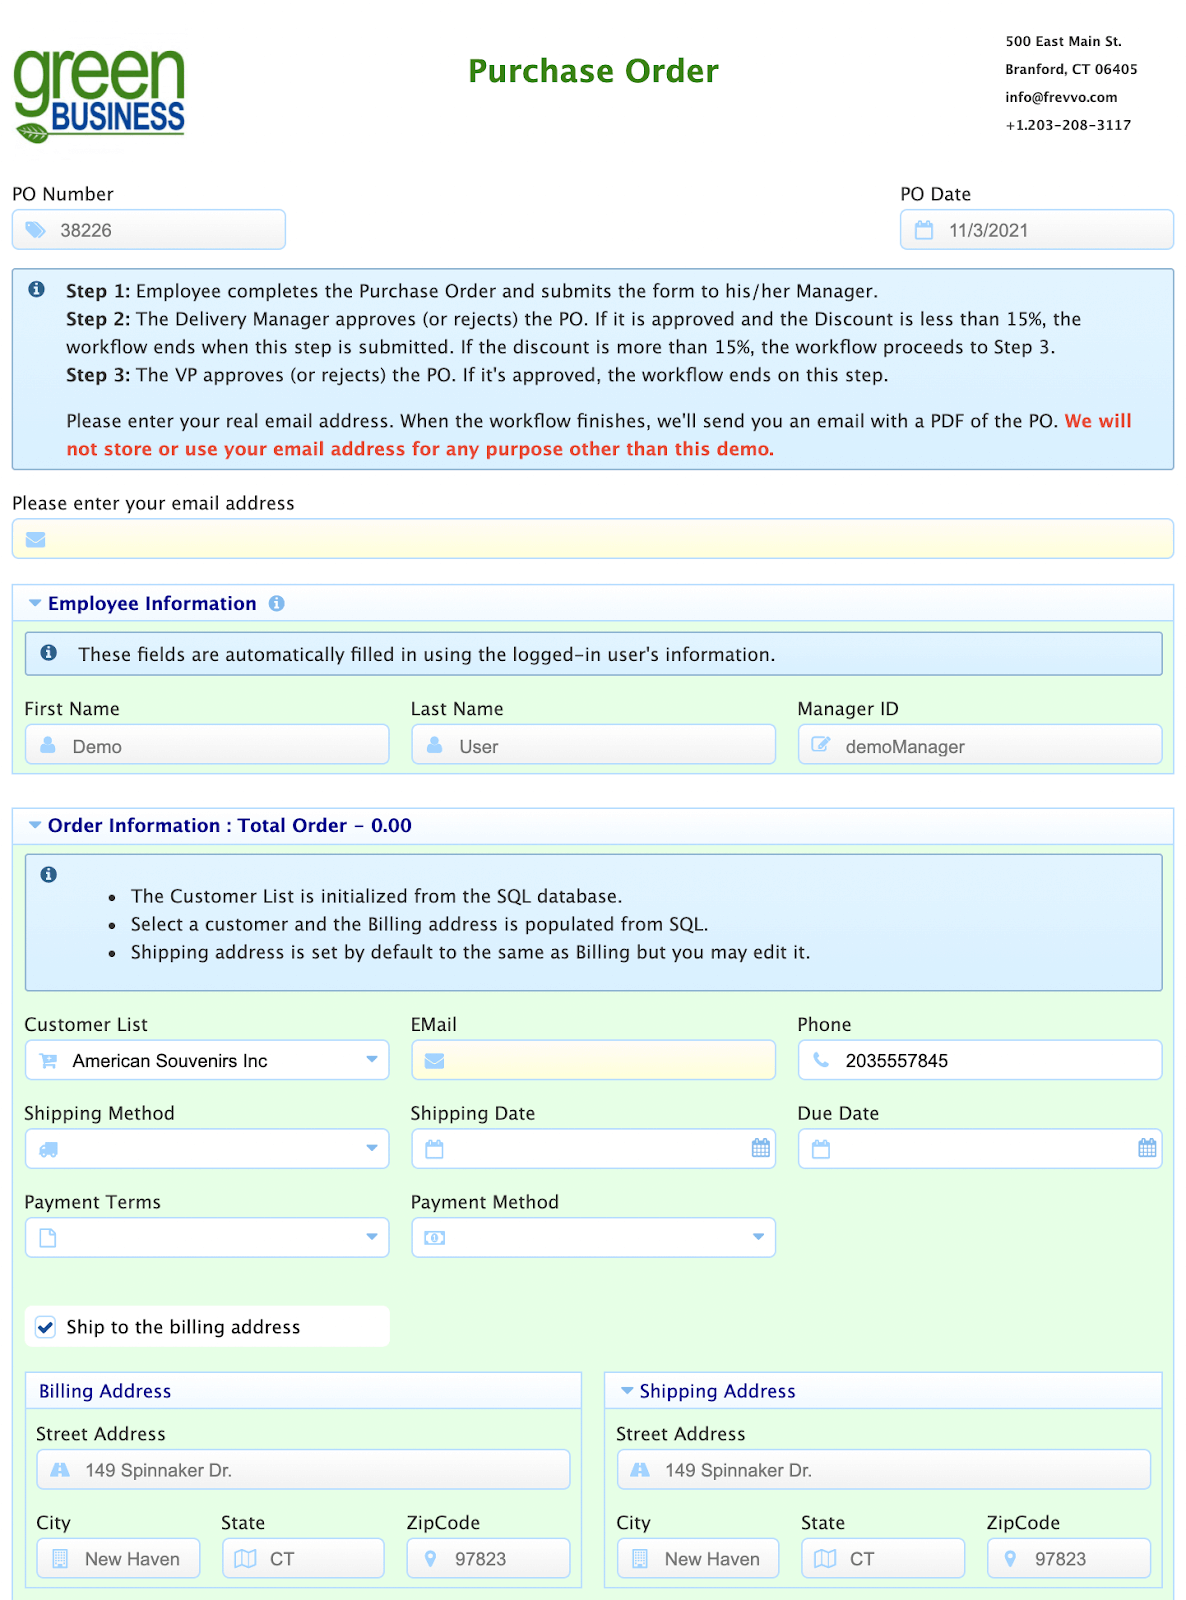 Example of a purchase order form